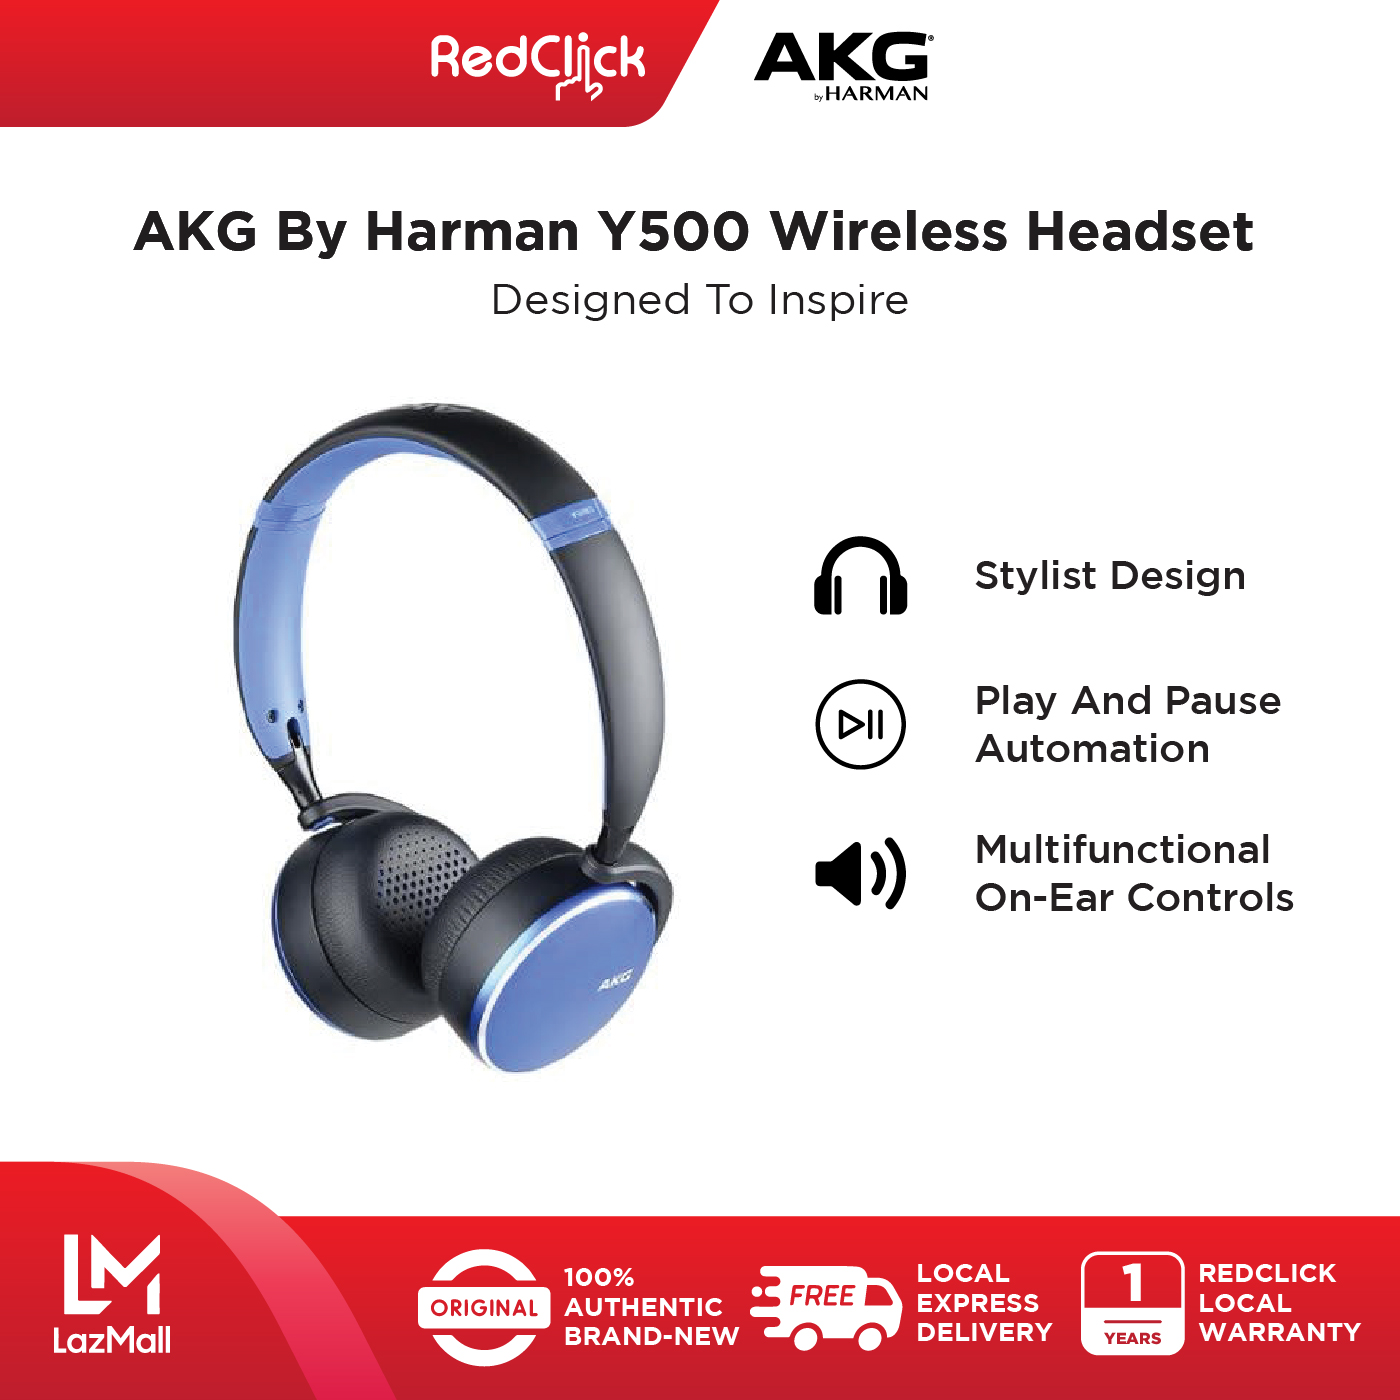 AKG Y500 Wireless Headphones Bluetooth 4.2 AKG Signature Sound Play and Pause Automation Ambient Aware Technology